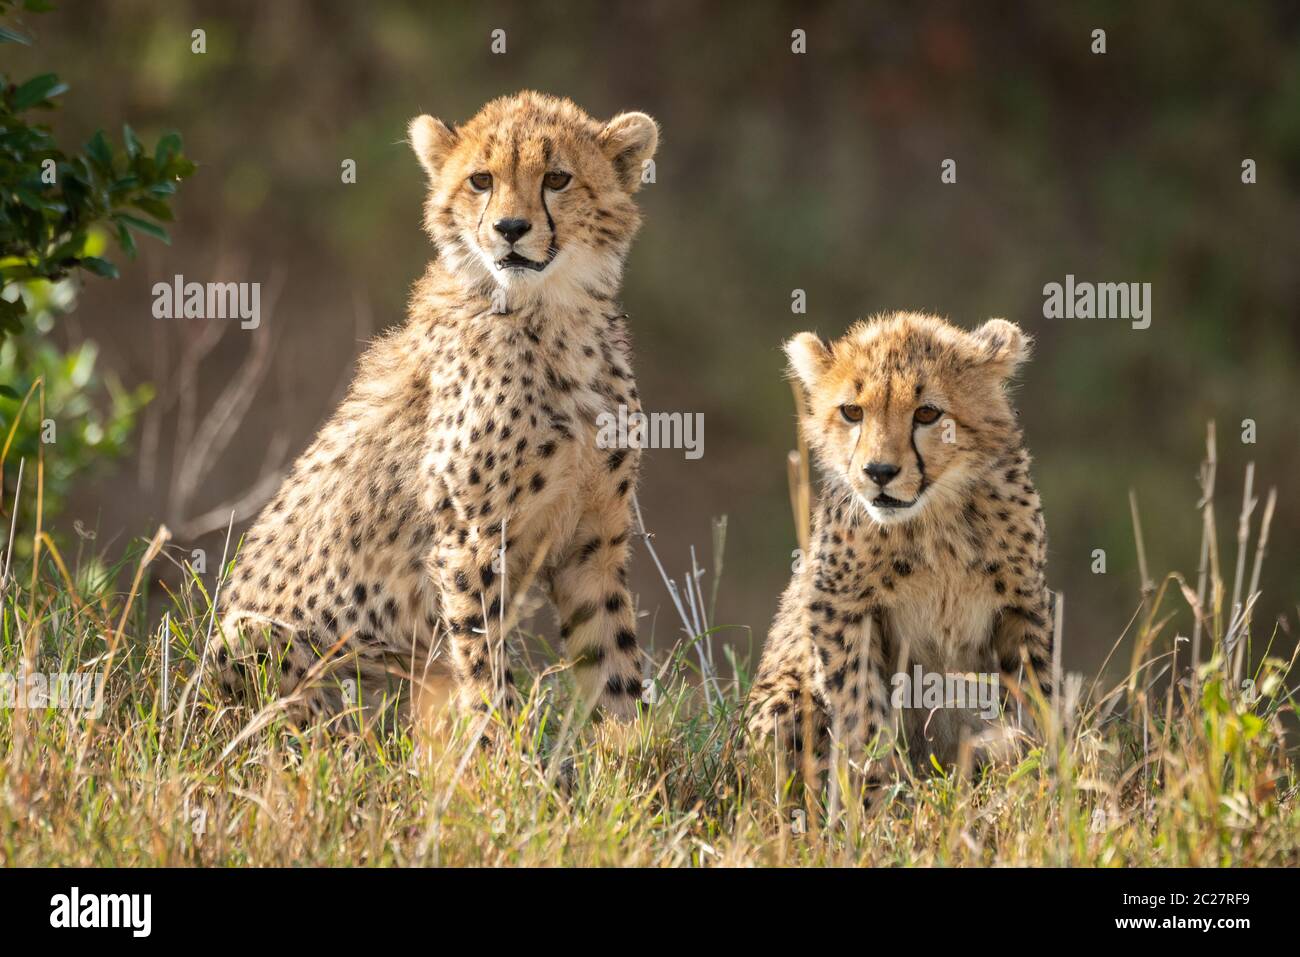 Two cheetah cubs sit staring in grass Stock Photo